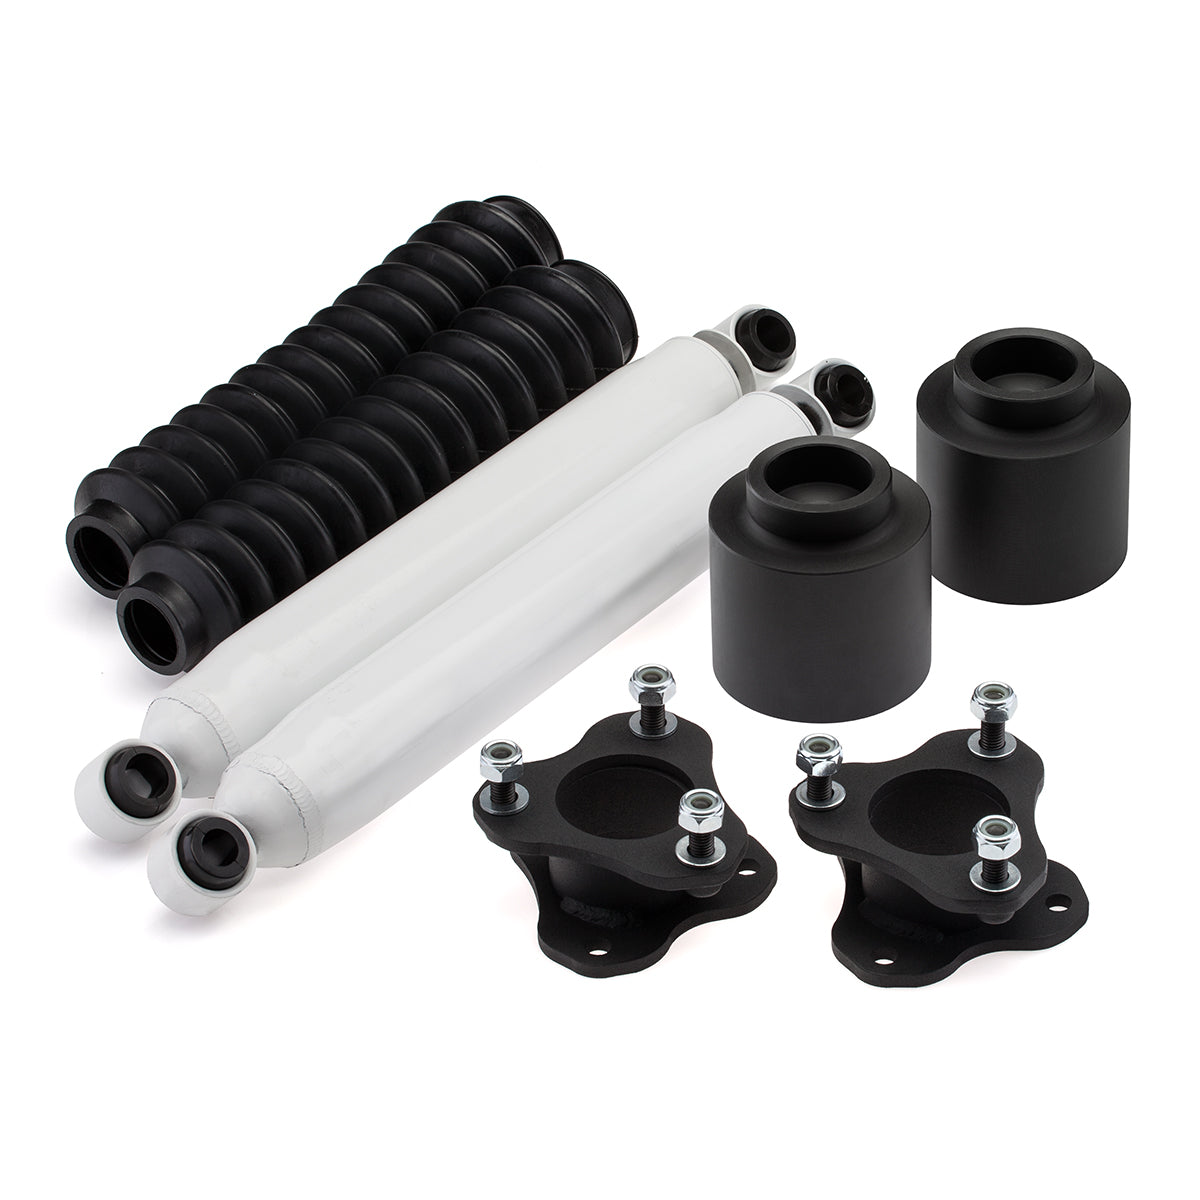 2009-2016 Dodge Ram 1500 Front Lift Kit with Shocks and Boots